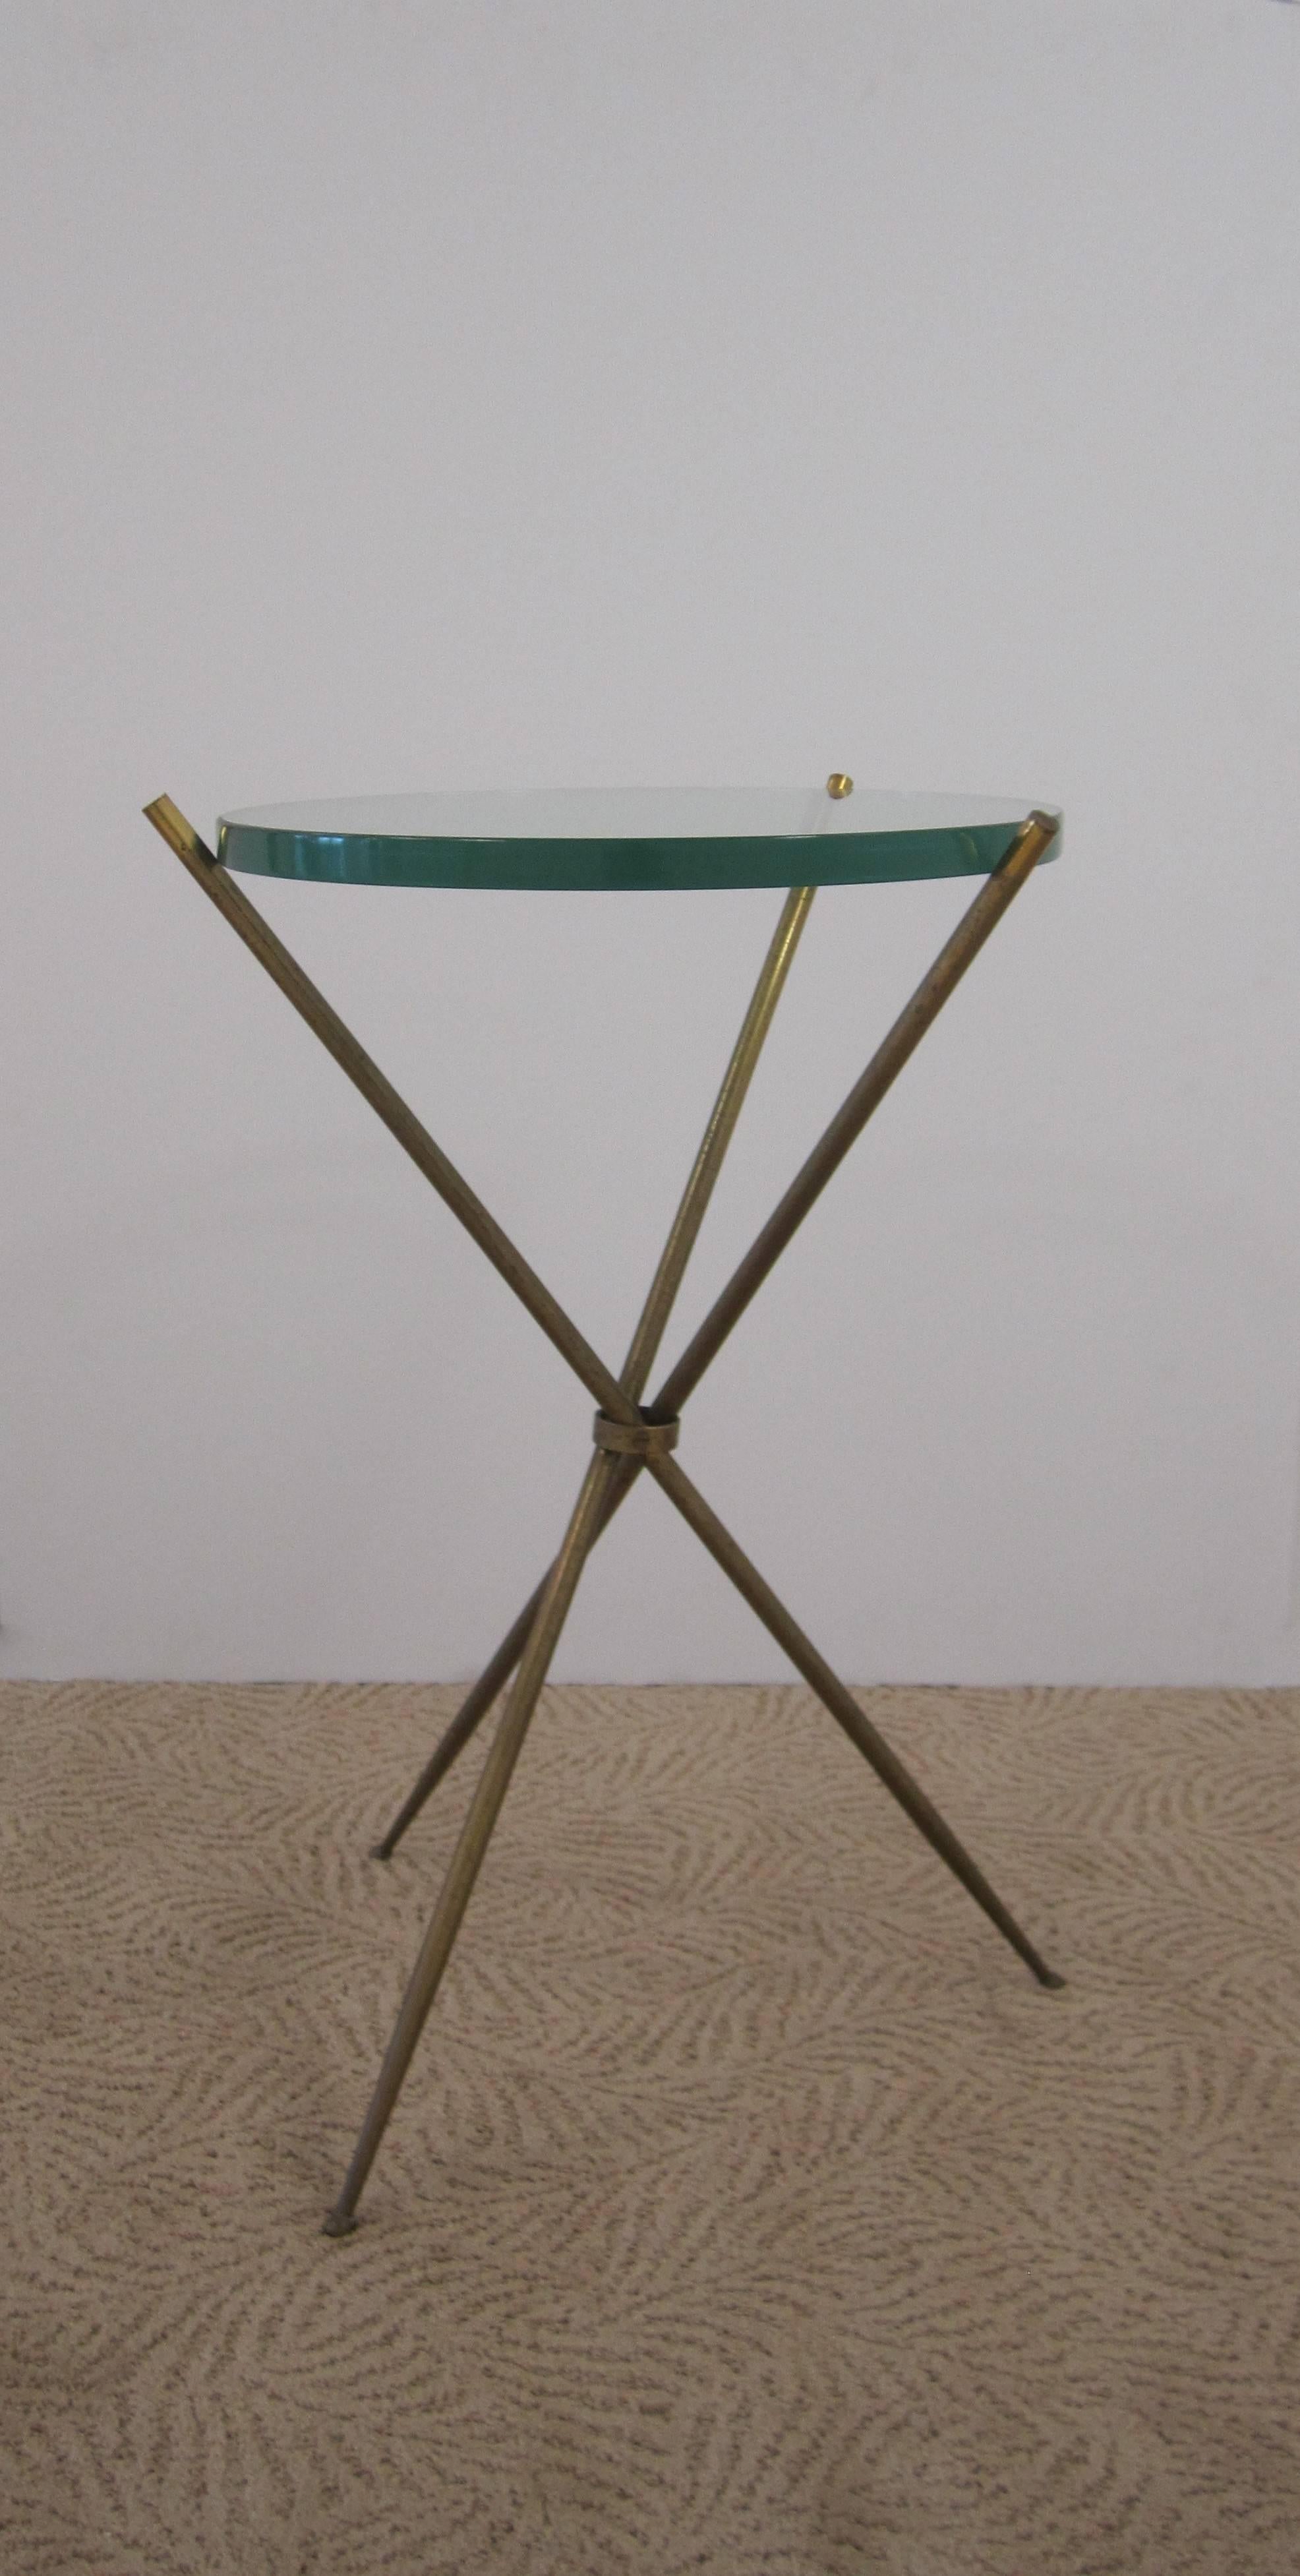 A vintage Modern Italian brass and glass tripod side table. Round table glass is 3/4 inch thick, held by a brass tripod base with tapered legs, circa 1960s, Italy. In the style of Italian designer Gio Ponti.  

Measurements include: approx. 22